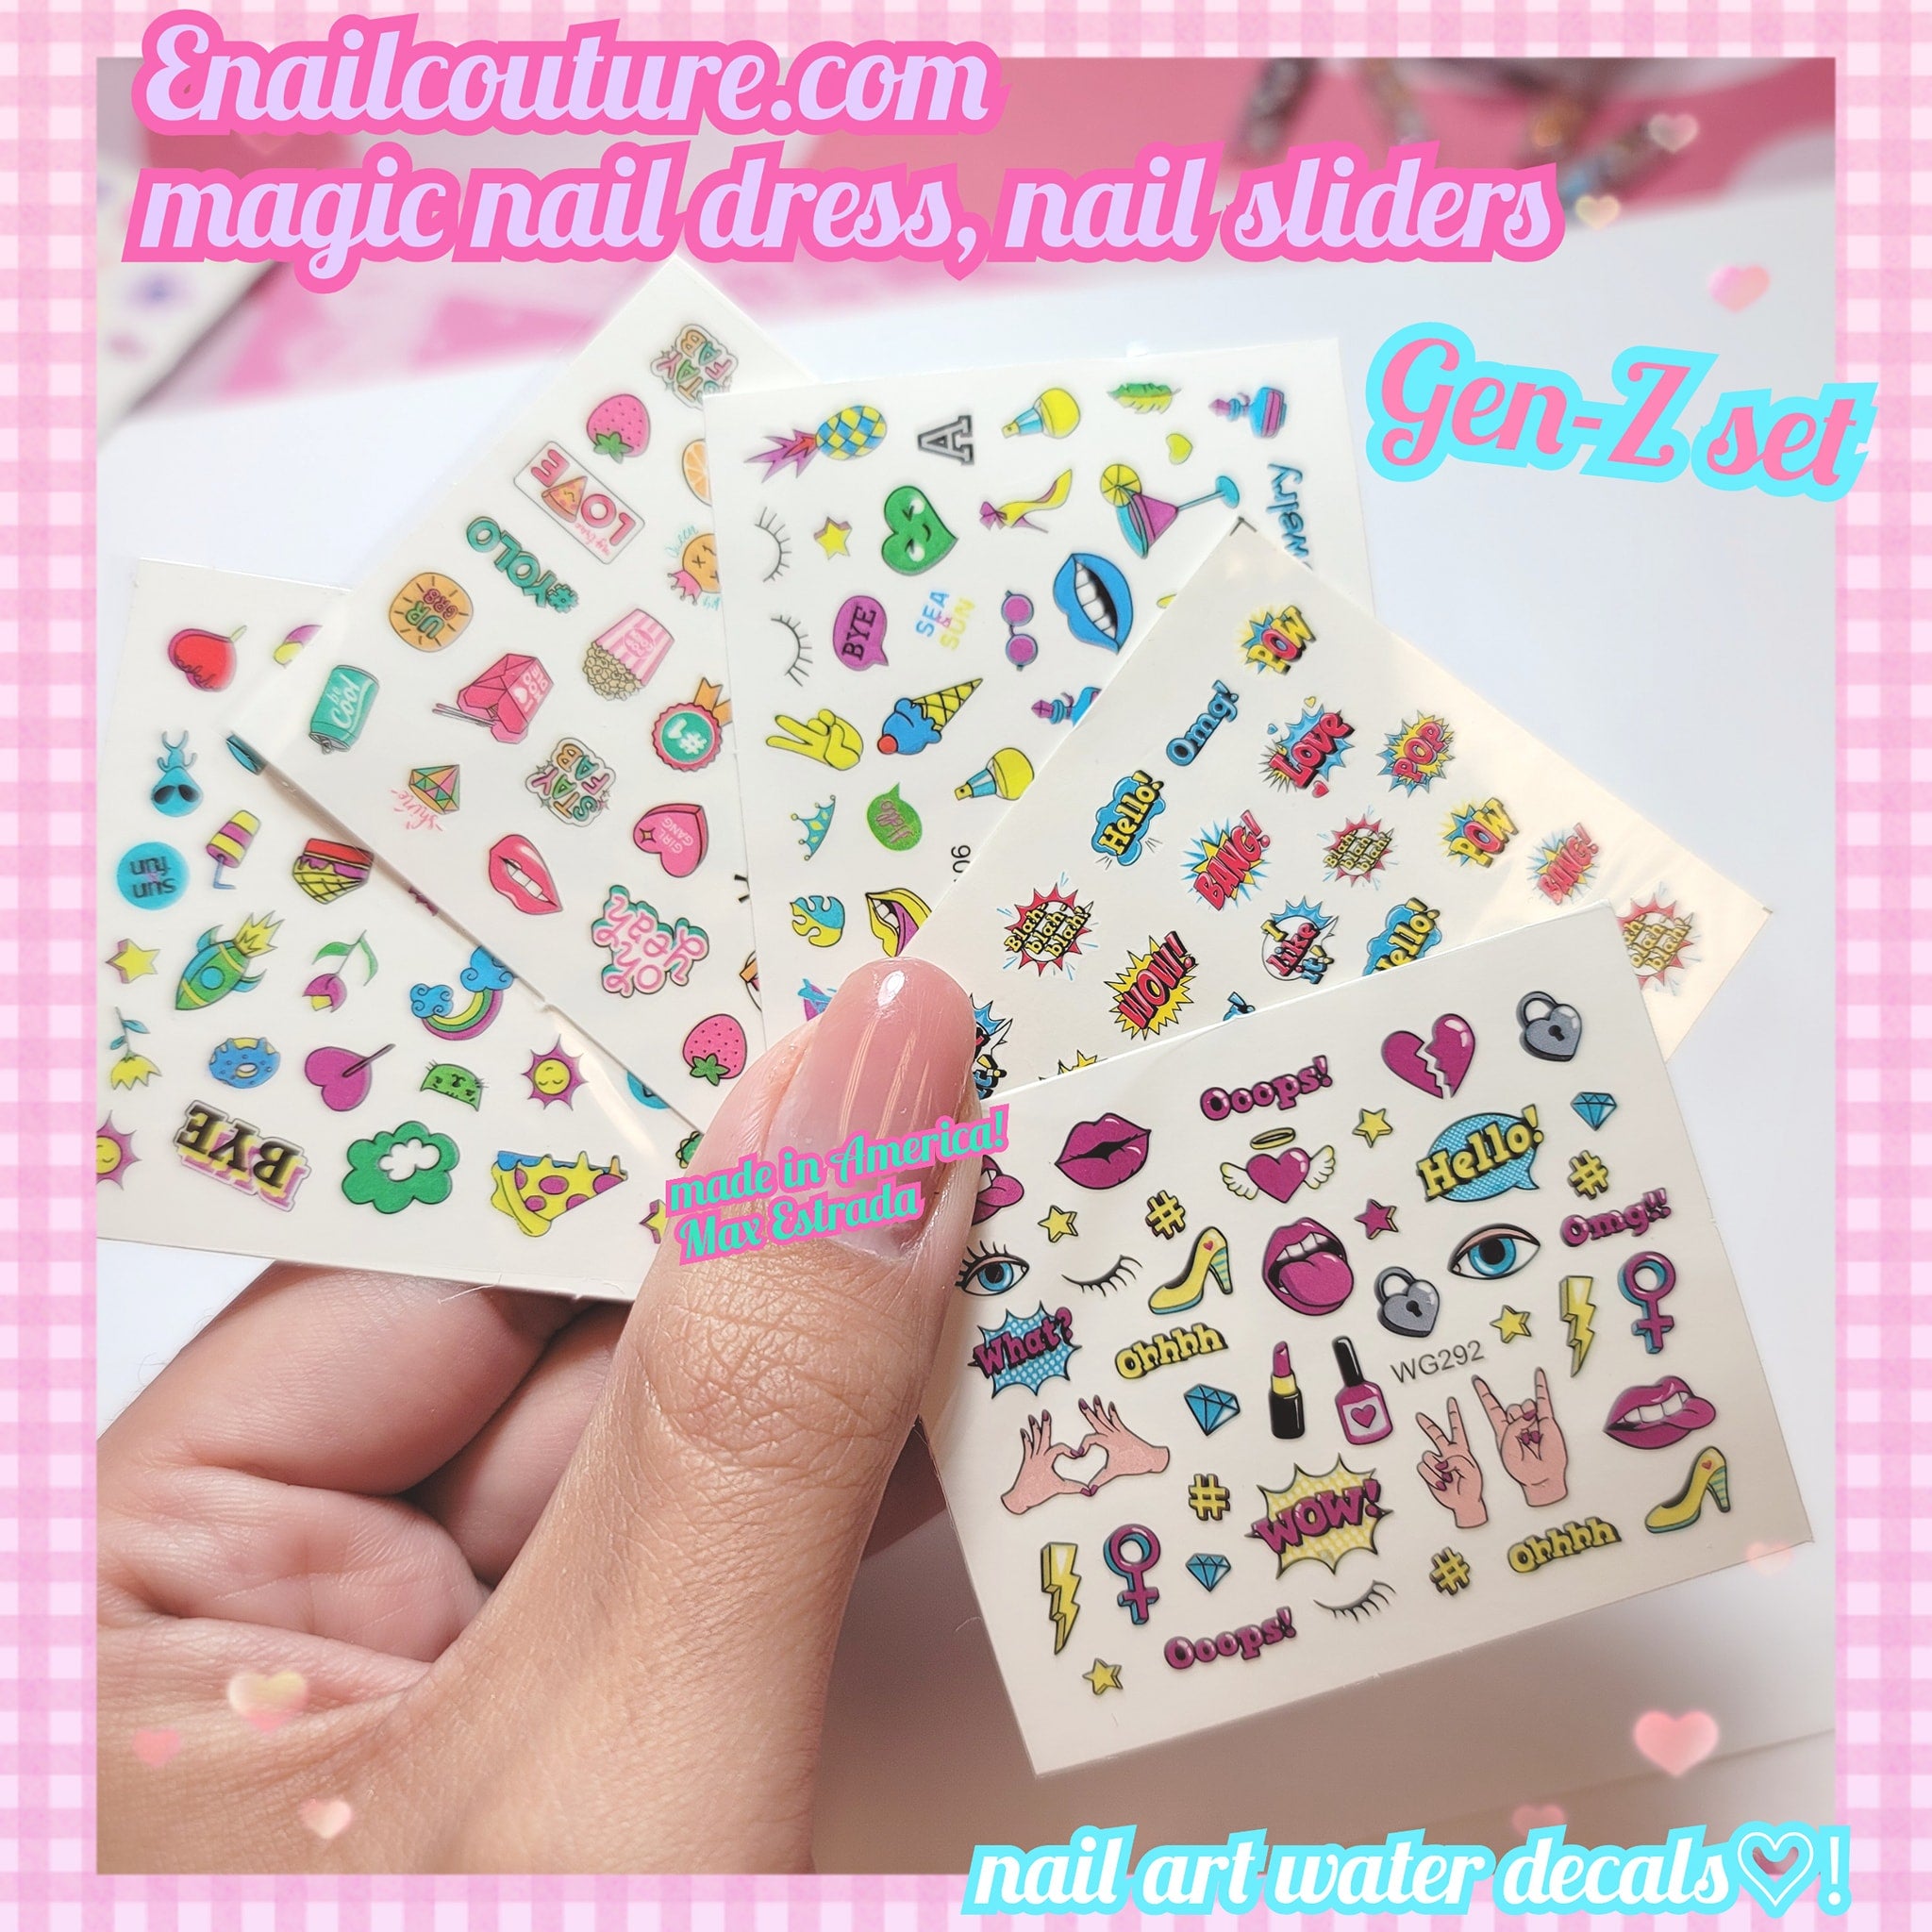 Magic Nail Dress Water Sliders (Nail Art Decals Nail Designs Colorful Water Transfer Stickers Nail Sliders Decals, Nail Art Manicure Decoration Accessories)(Transparent Silicone Head Nail Print Art Stamping Stamper Manicure Tools)